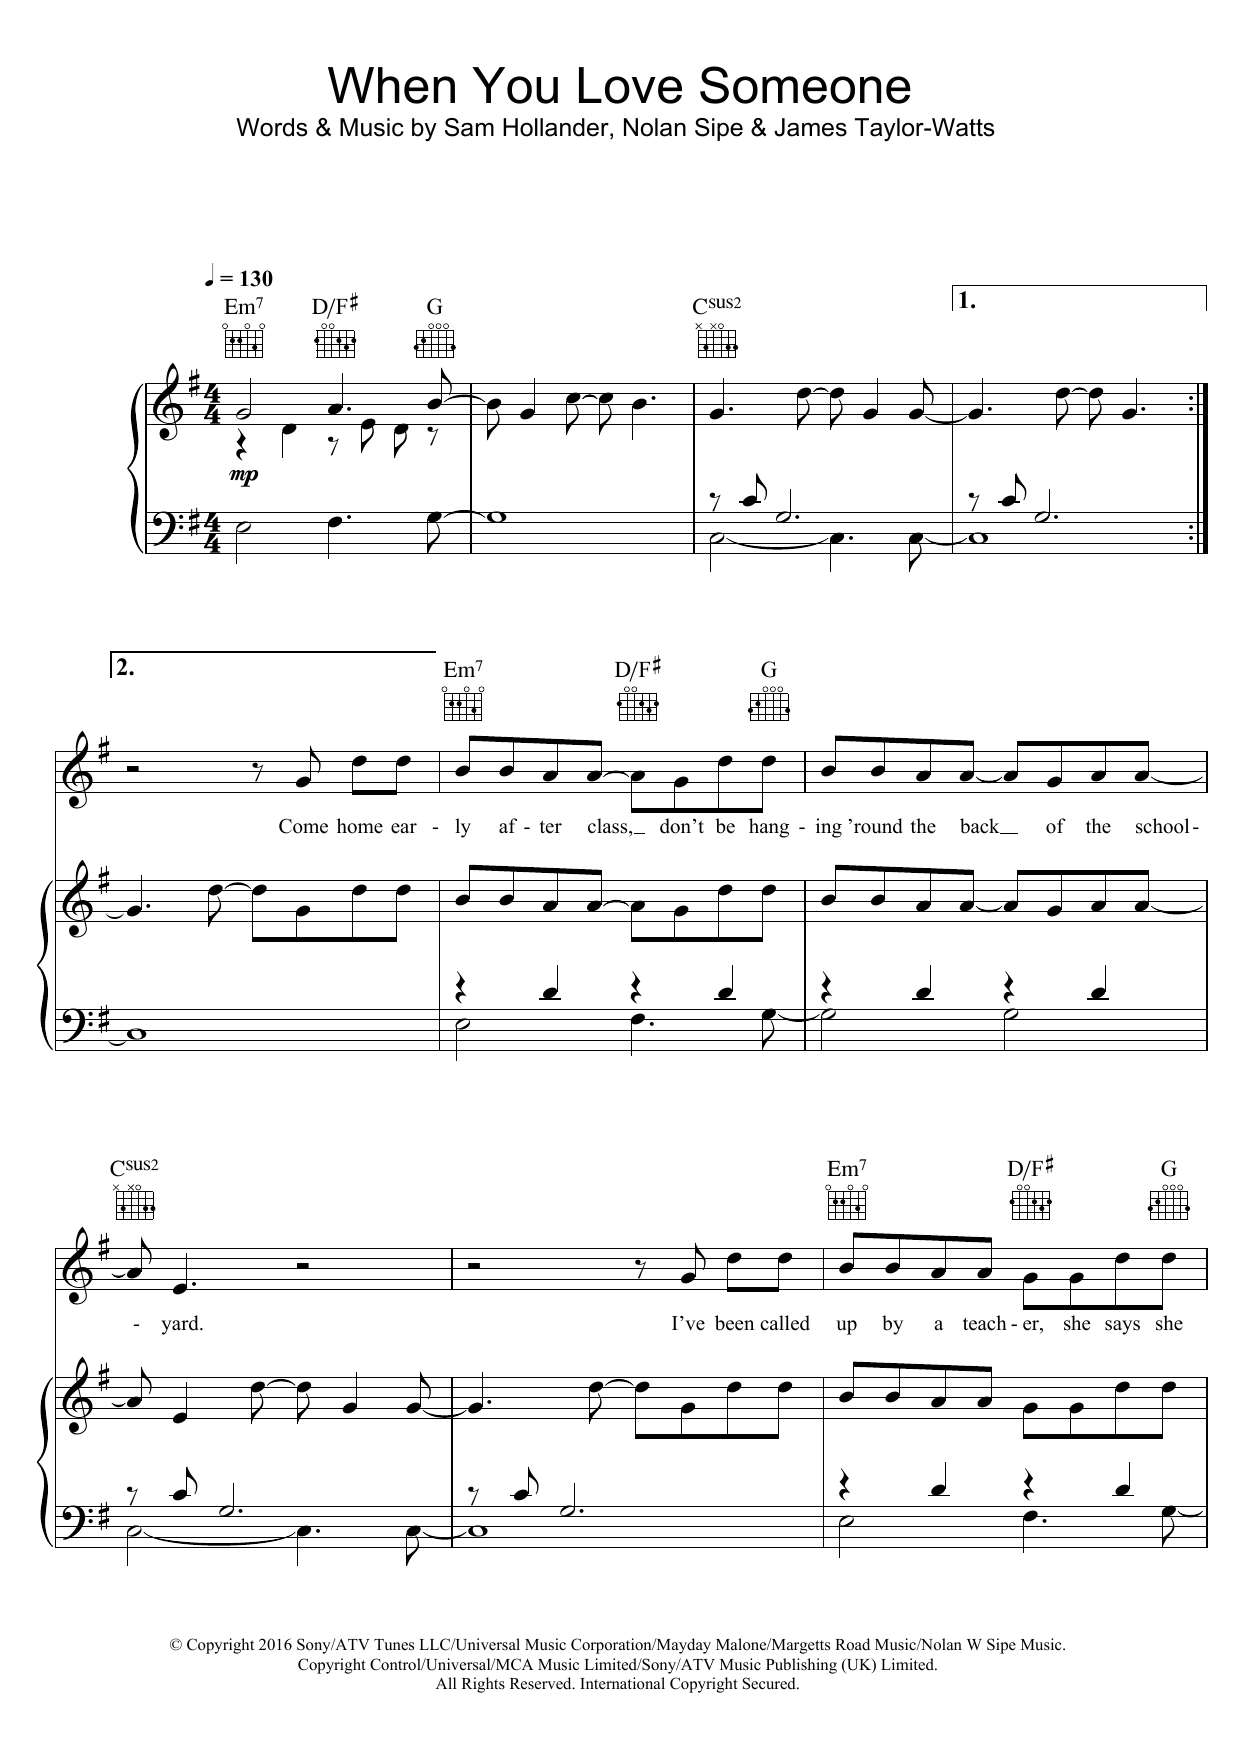 James TW "When You Love Someone" Sheet Music PDF Notes, Chords | Score Piano, Vocal & (Right-Hand Melody) Download Printable. SKU: 123806